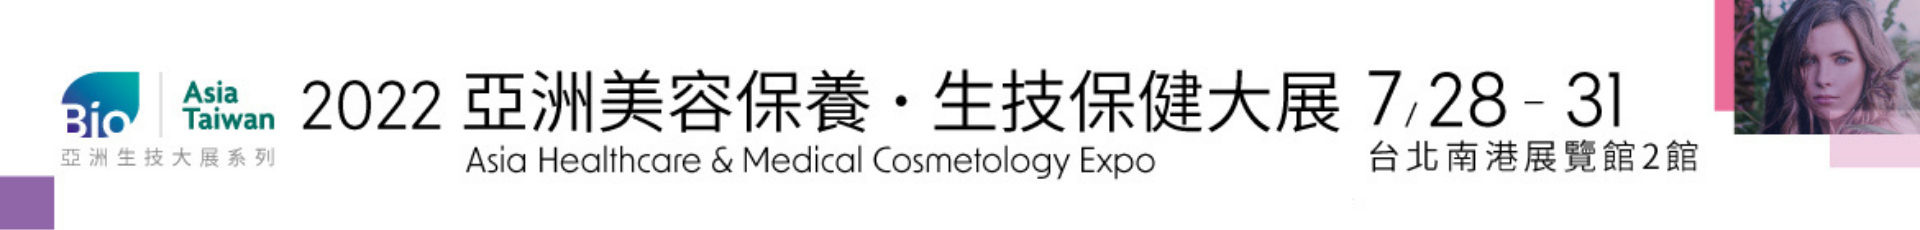 2022 Asia Healthcare & Medical Cosmetology Expo